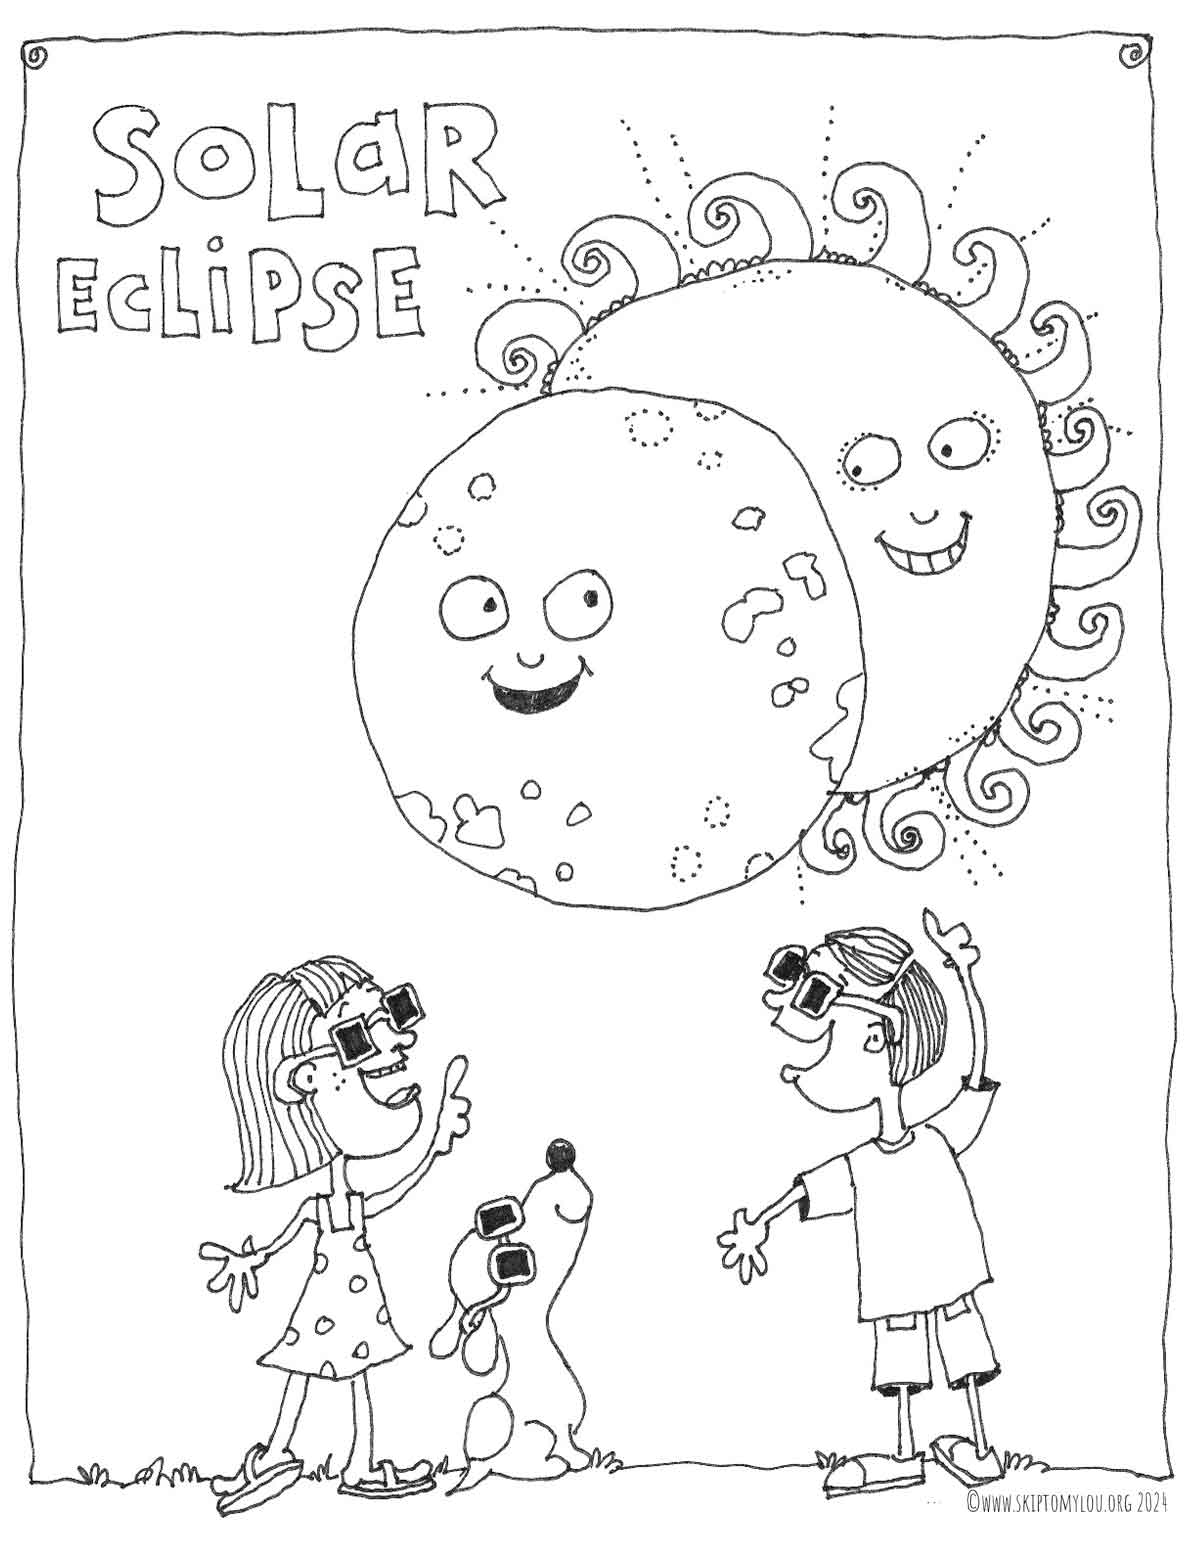 solar eclipse coloring page two kids and dog wearing special glasses looking at the sun and moon
